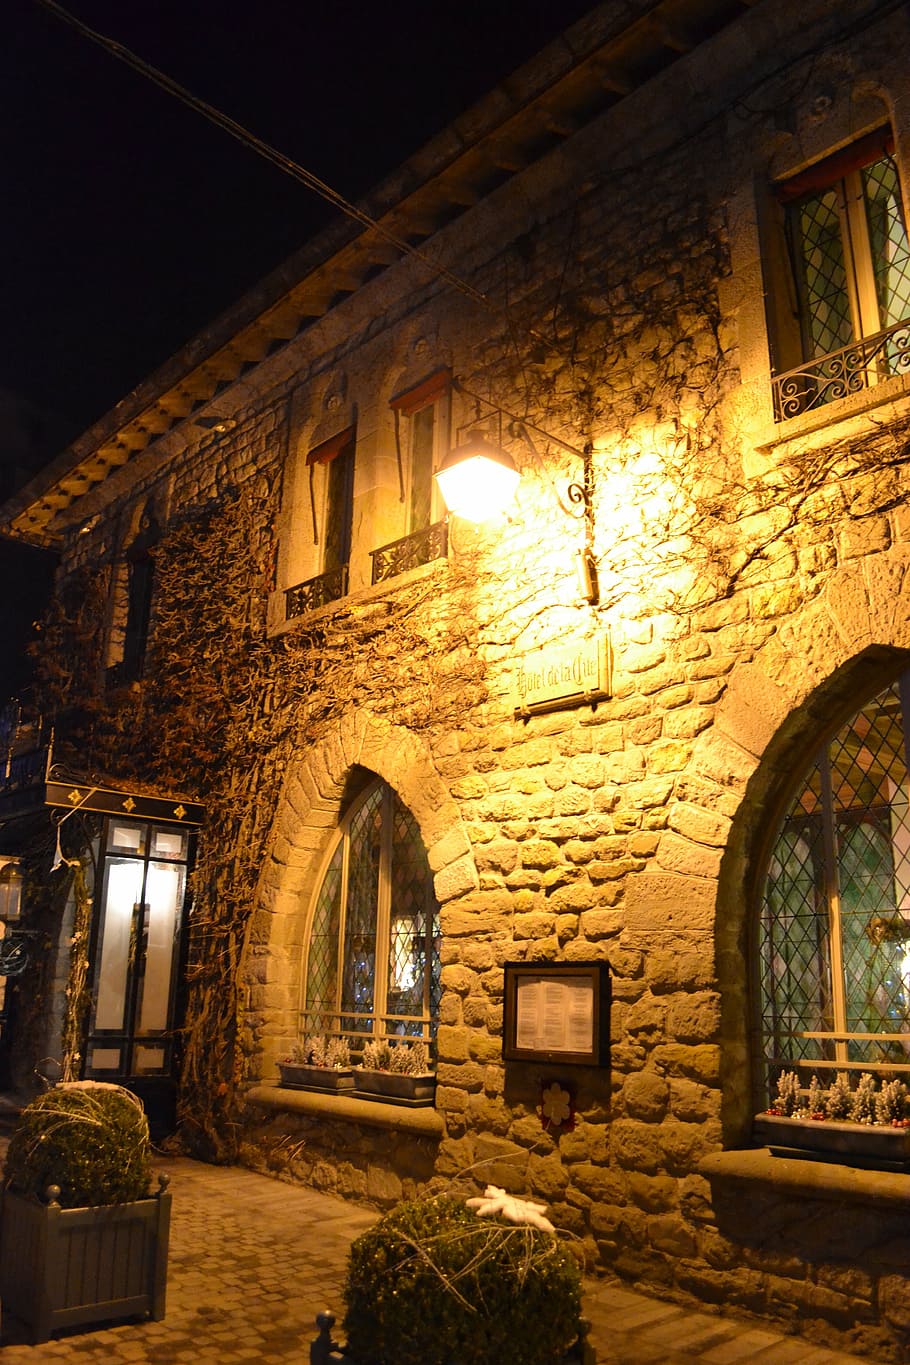 stone house, night, restaurant, medieval house, carcassonne, france, medieval, architecture, street, illuminated